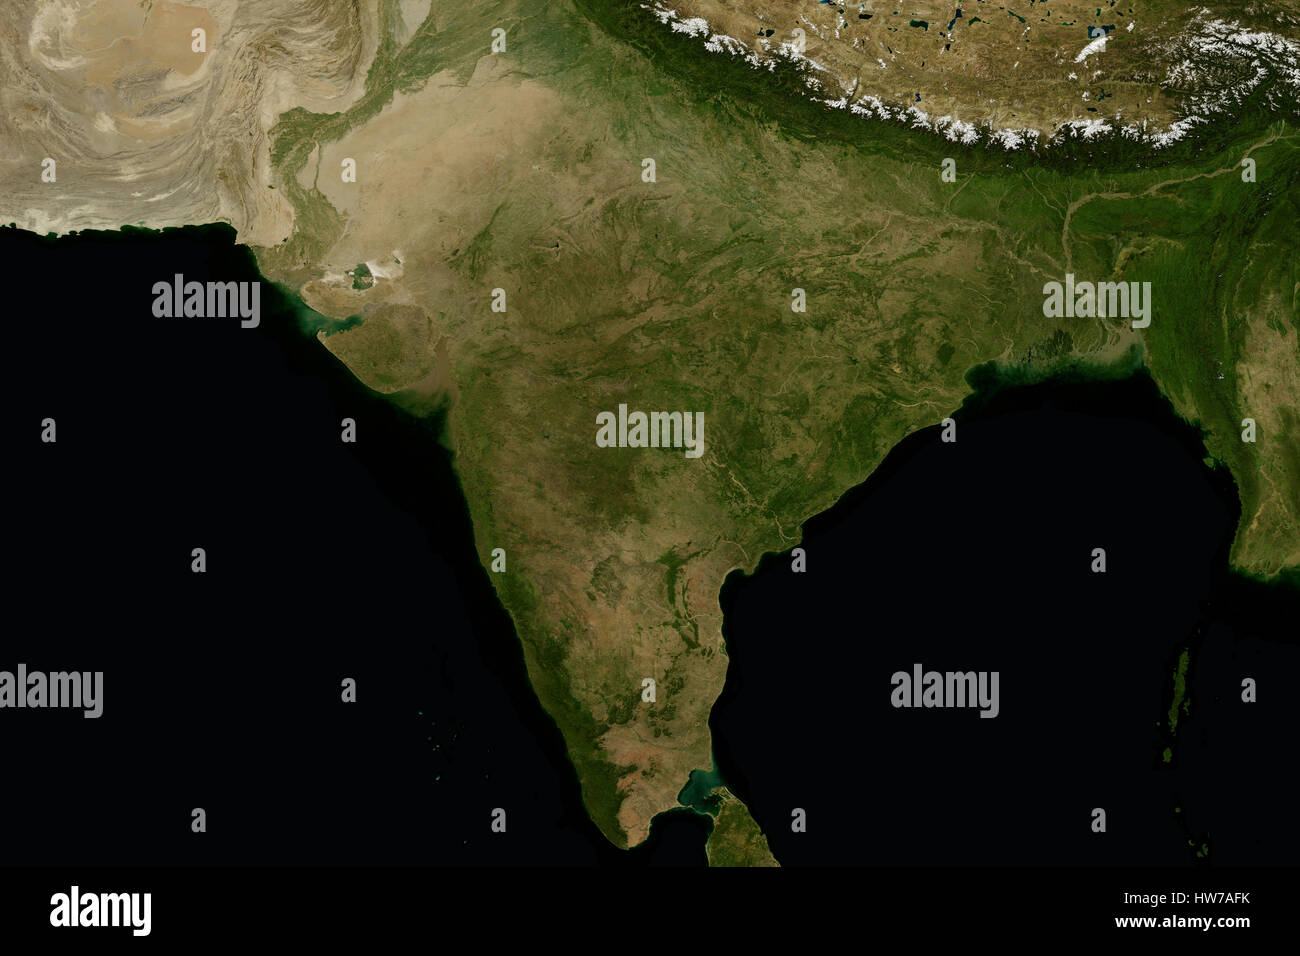 India and the surrounding region. View from space. Stock Photo